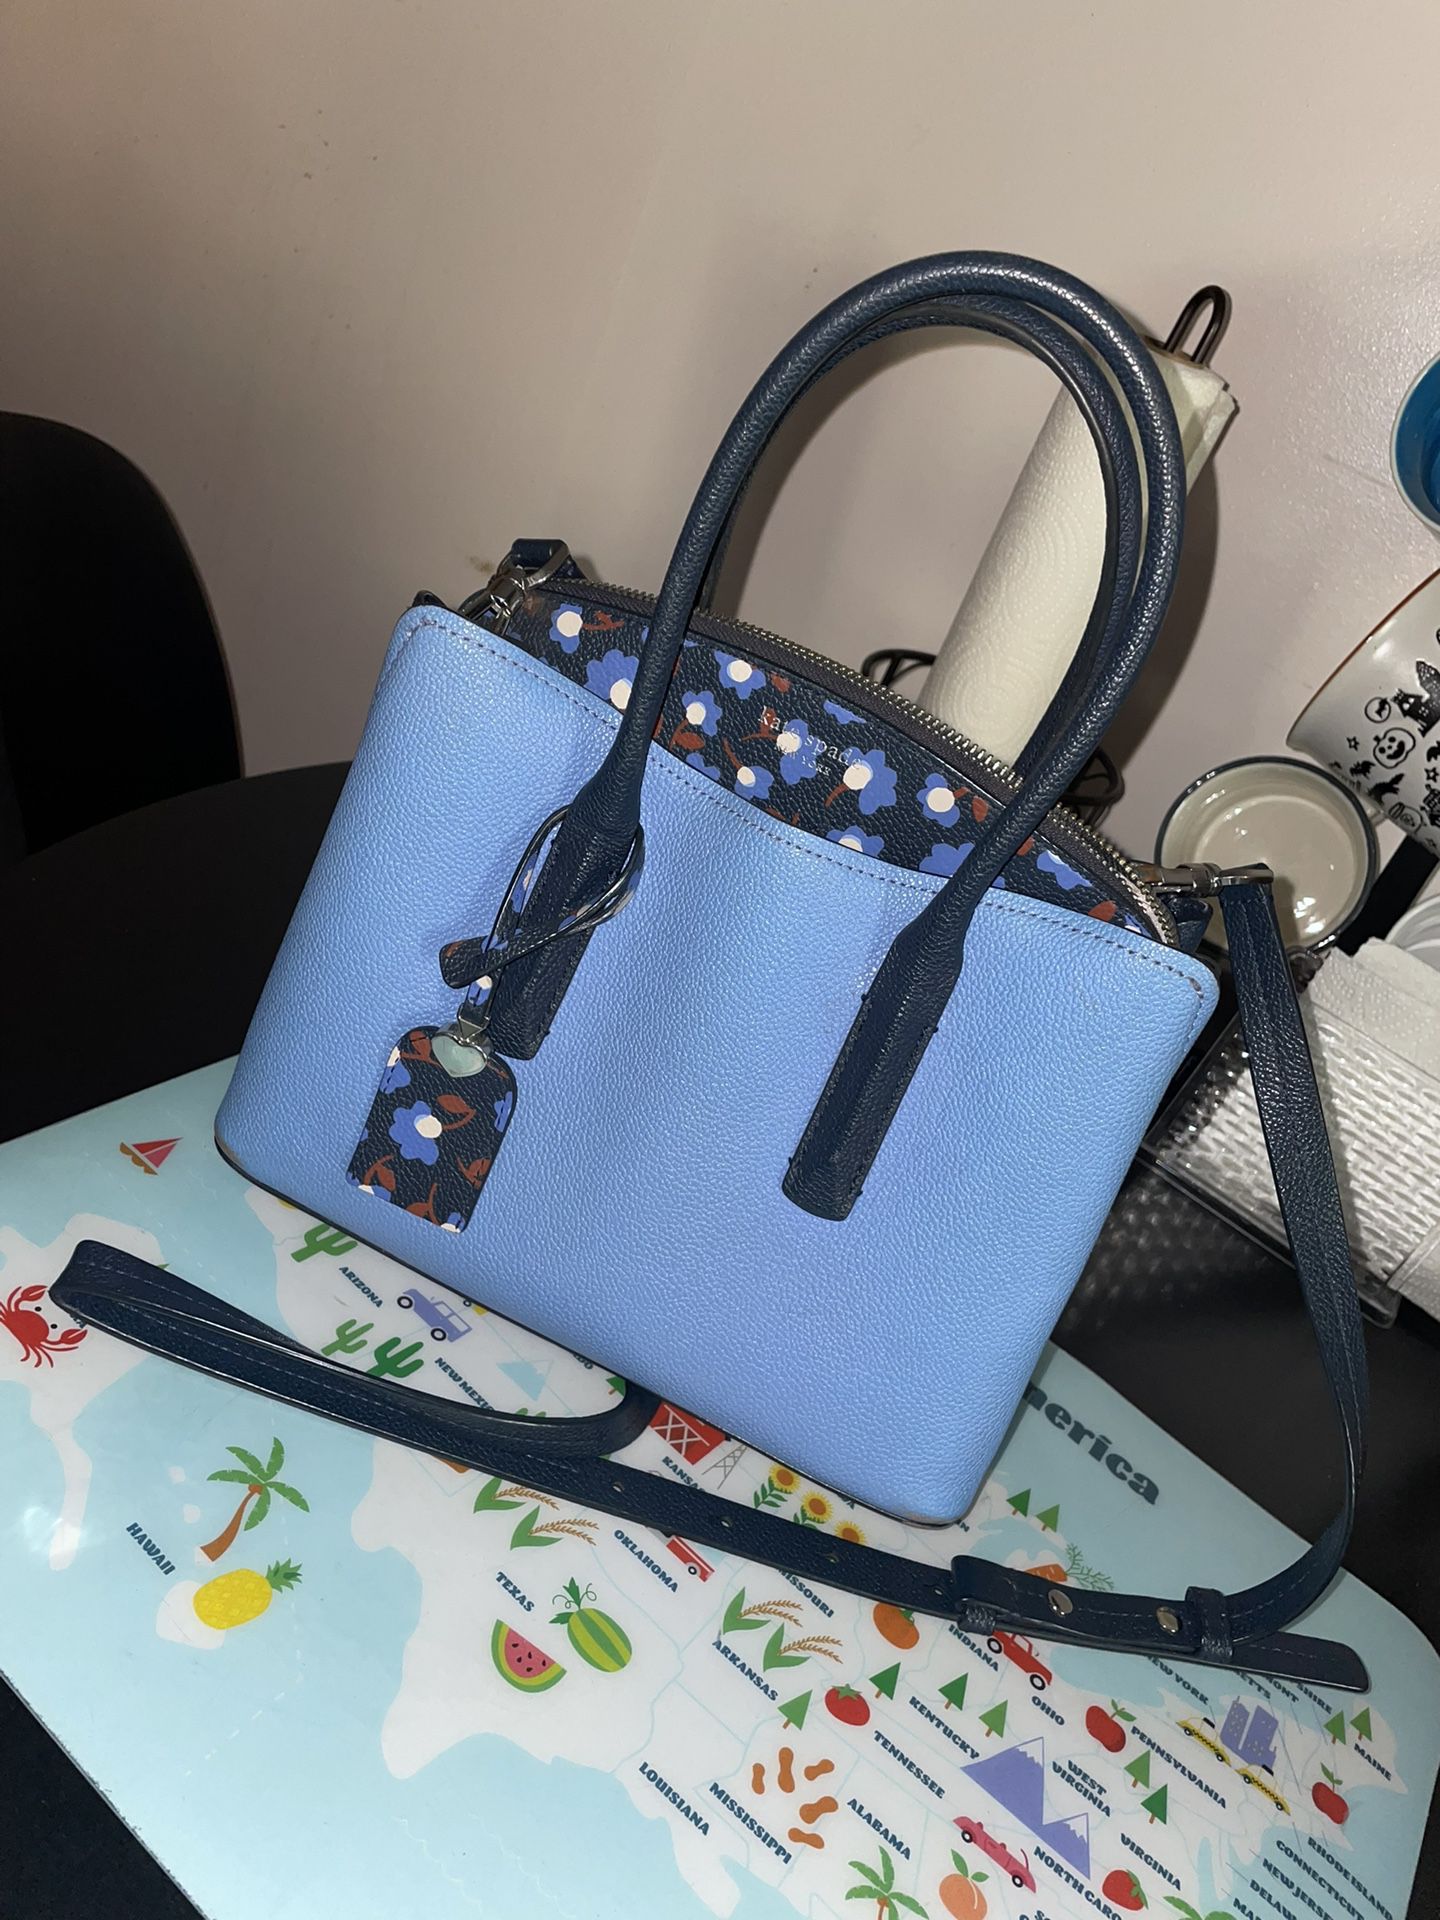 Forget Me Not Kate Spade Purse for Sale in Tujunga, CA - OfferUp